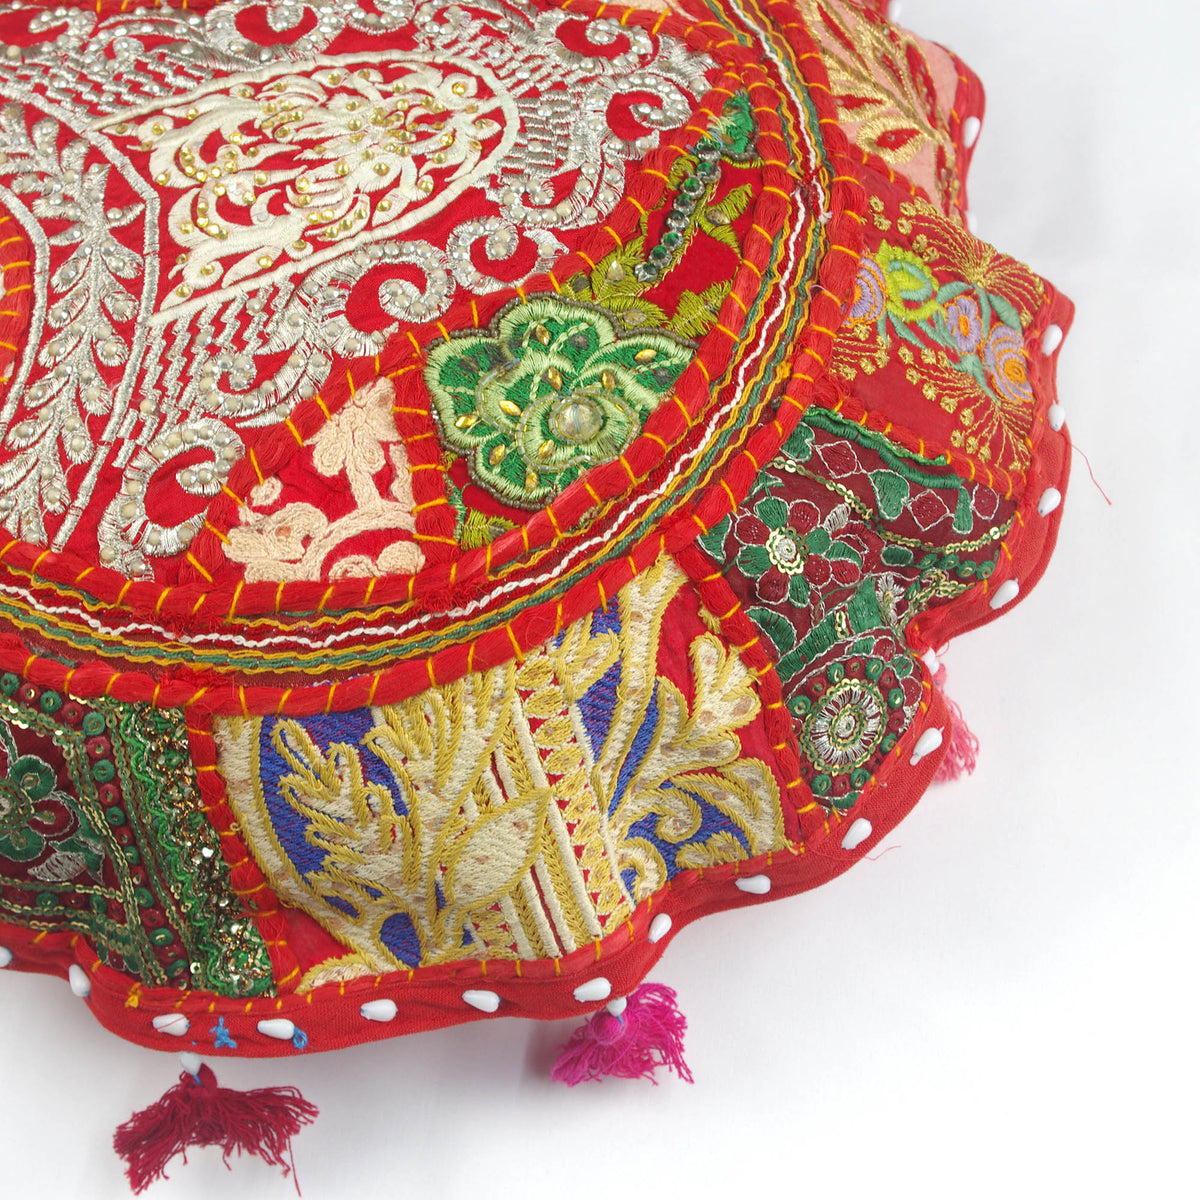 Red Round Floor Embroidered Patchwork Pouf Ottoman Indian Vintage Cushion Cover 18"